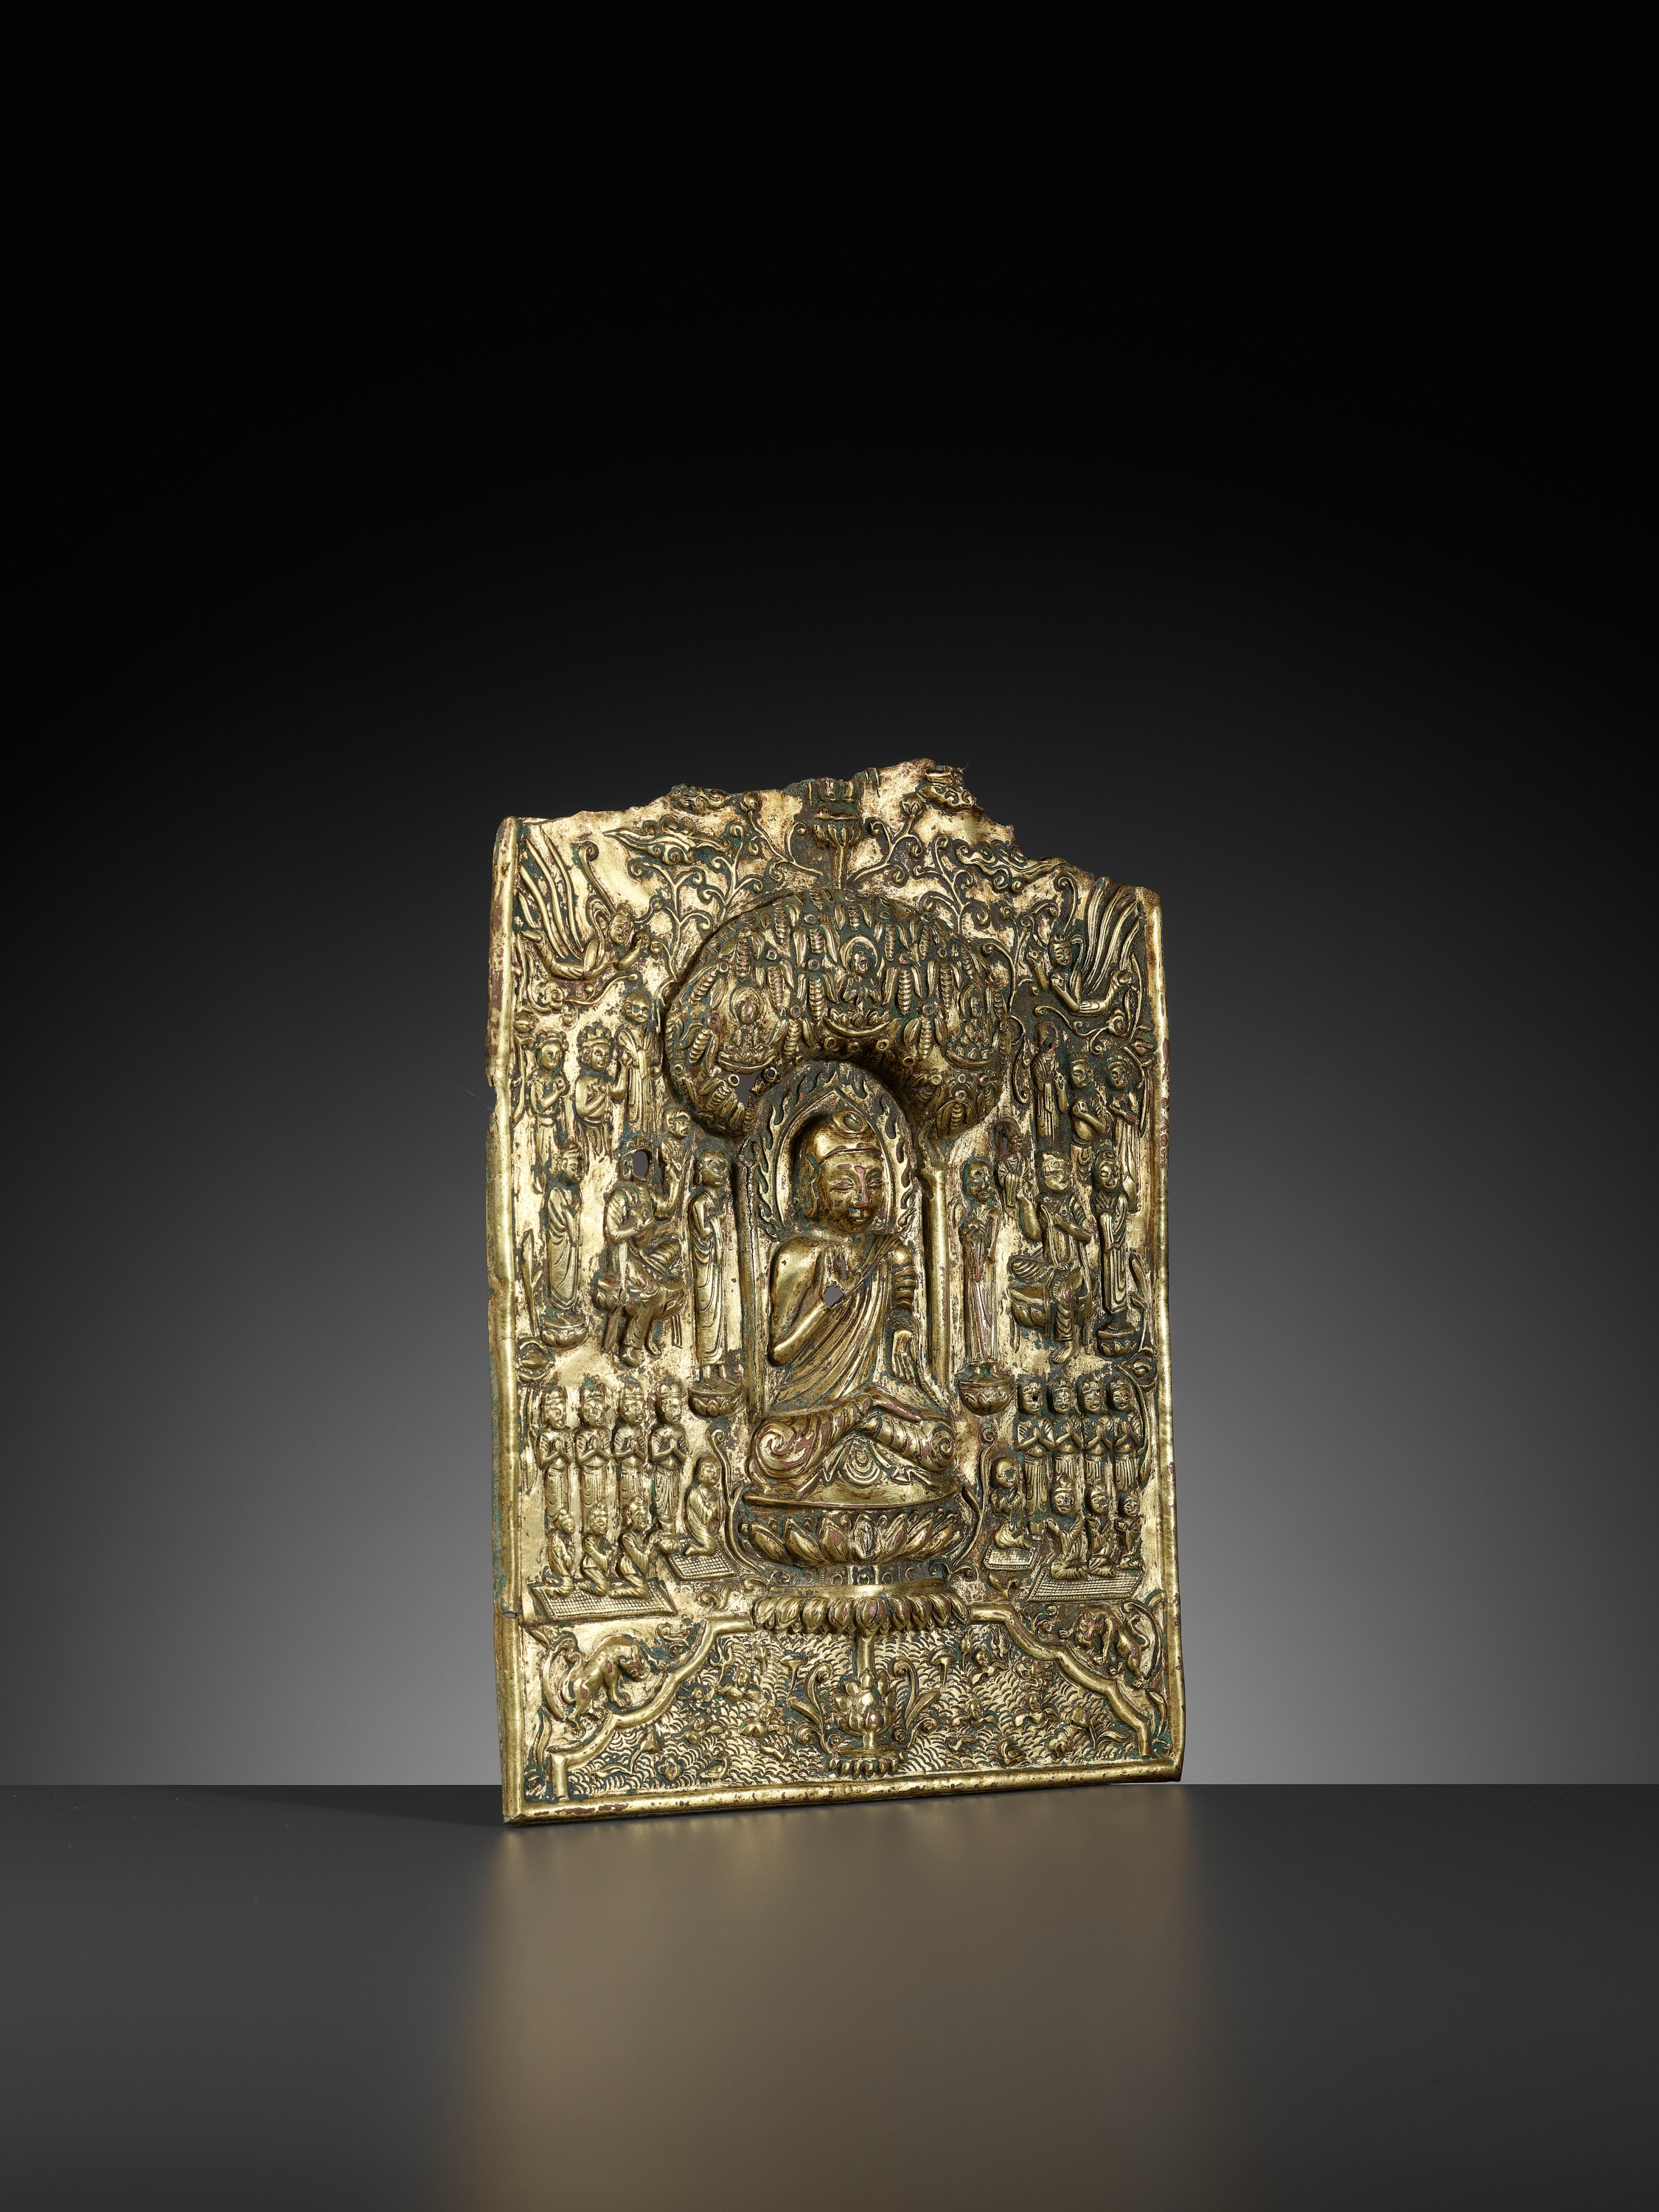 A LARGE AND IMPORTANT BUDDHIST VOTIVE PLAQUE, GILT COPPER REPOUSSE, EARLY TANG DYNASTY - Image 19 of 21